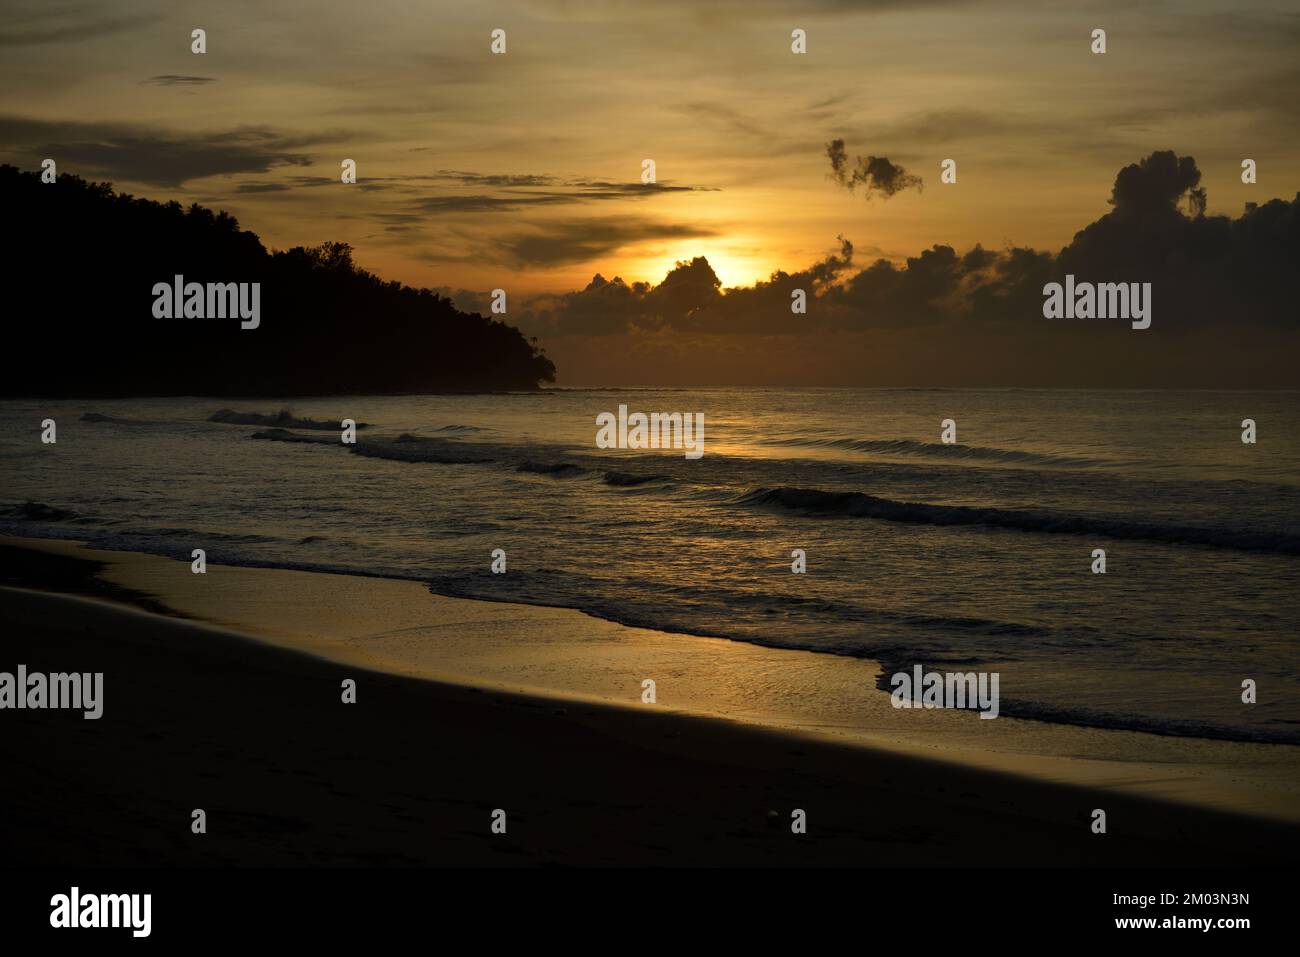 Sunset over the beach at the Tip of Borneo, Sabah, Malaysia. Stock Photo